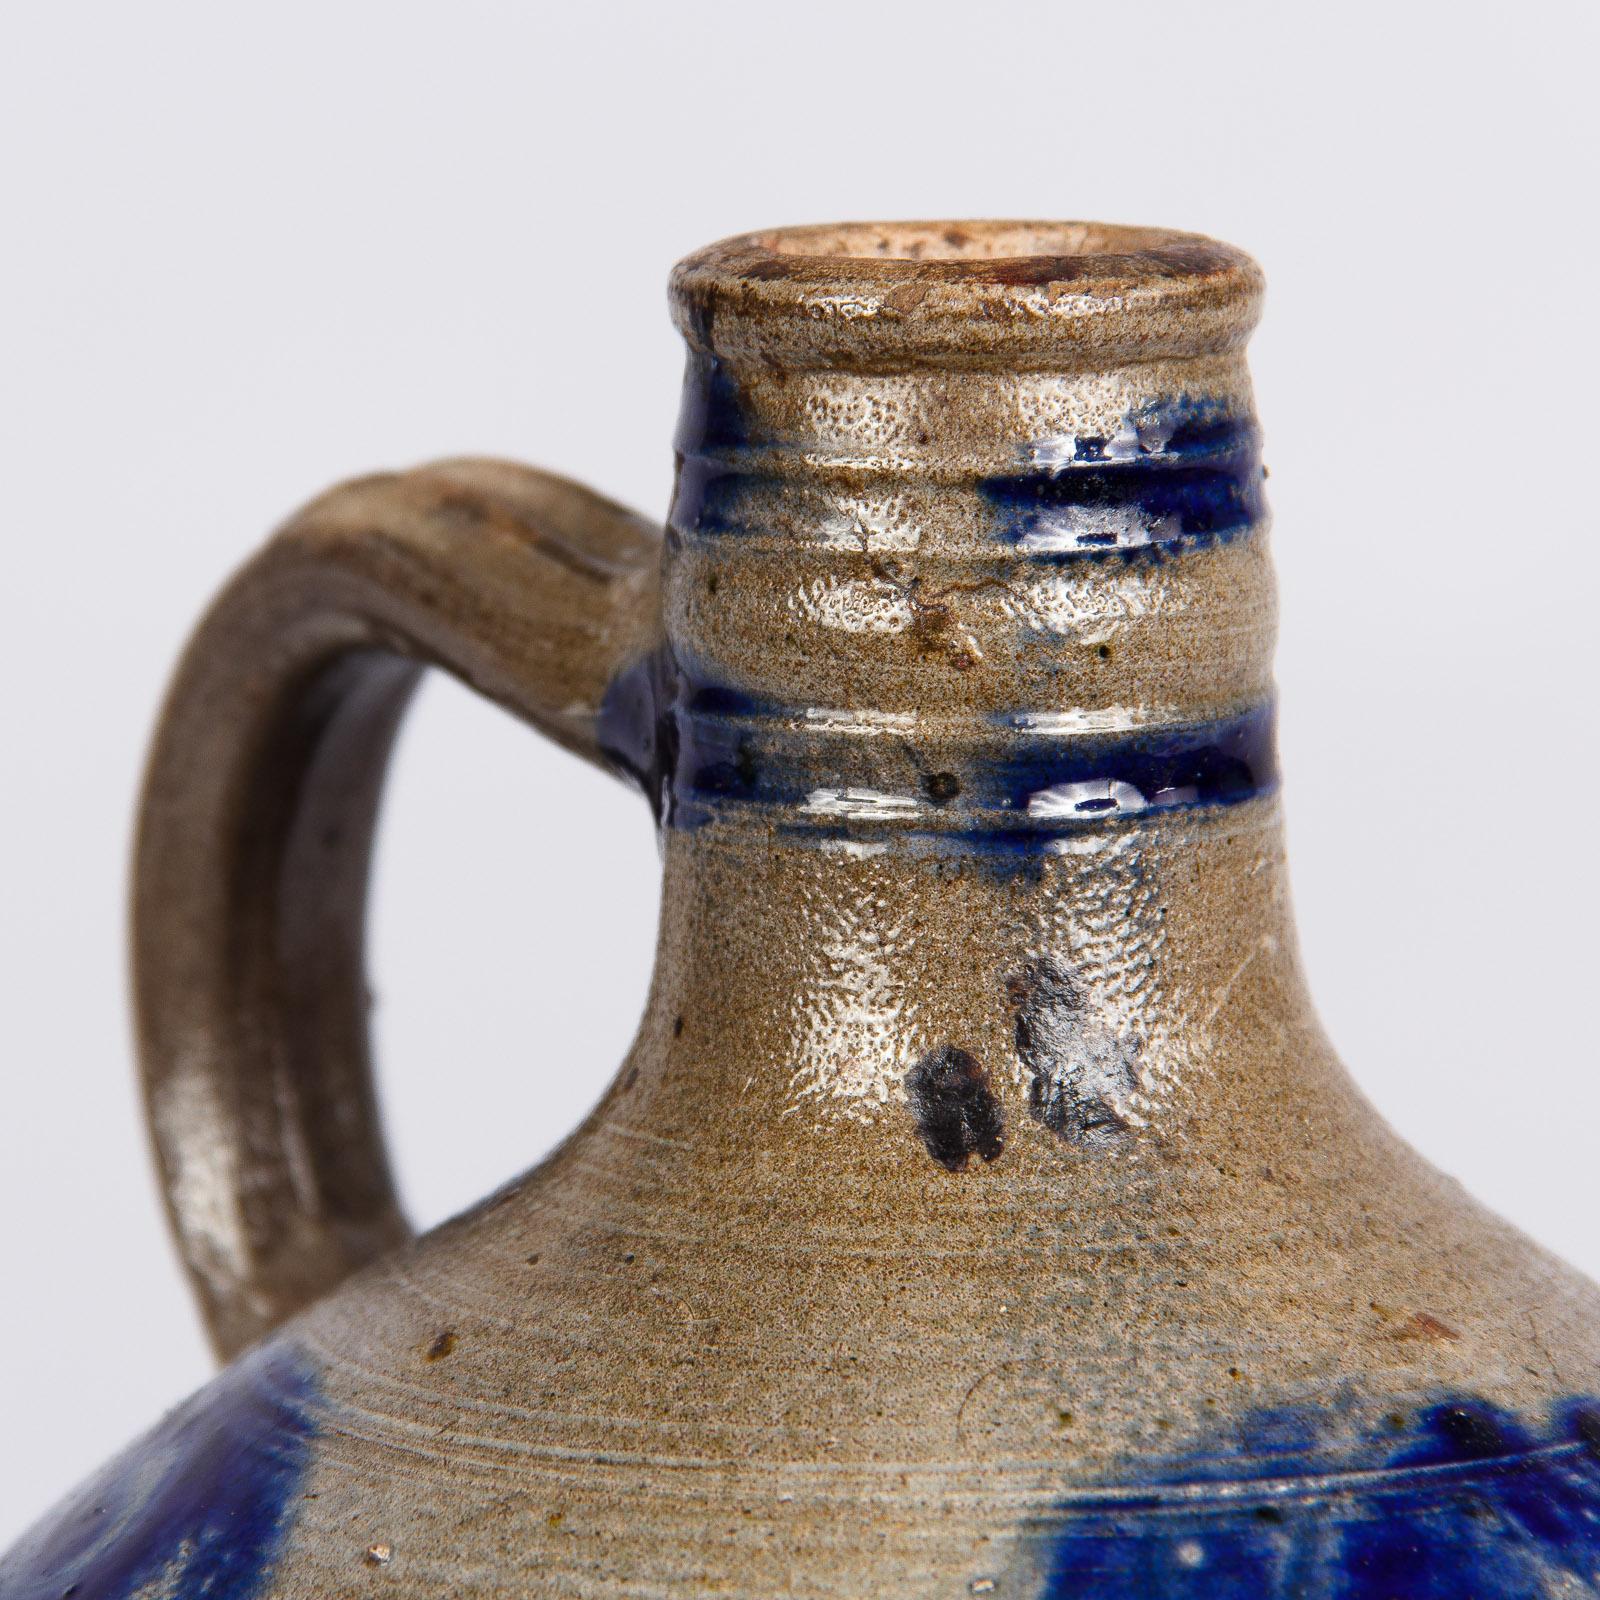 Glazed French Earthenware Cruche from Alsace Region, 1920s